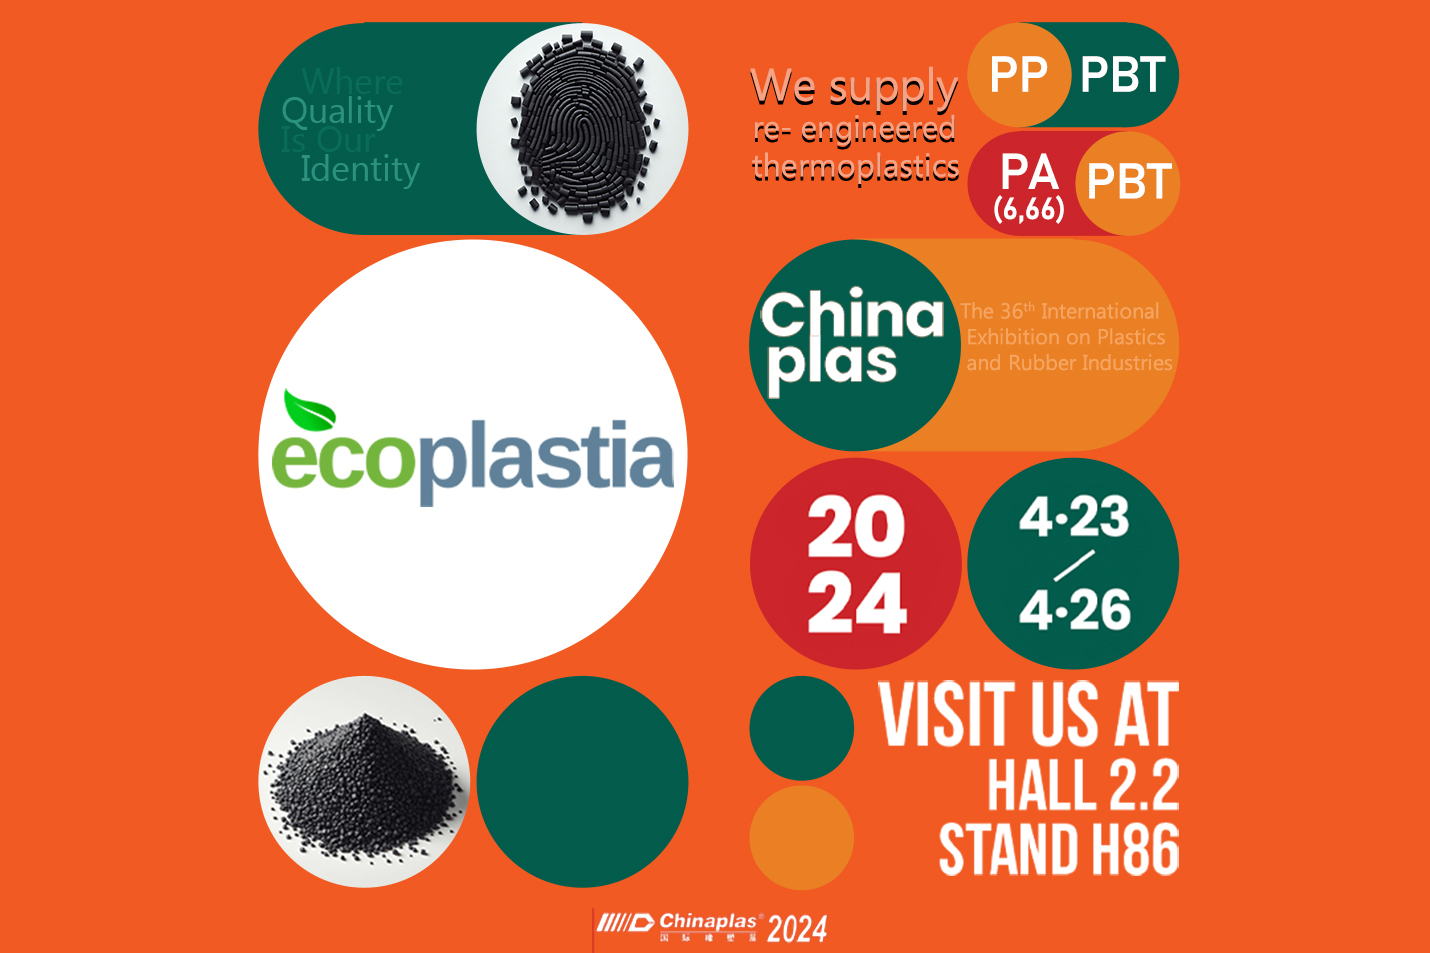 We eagerly look forward to meet you at the ChinaPlas 2024 exhibition